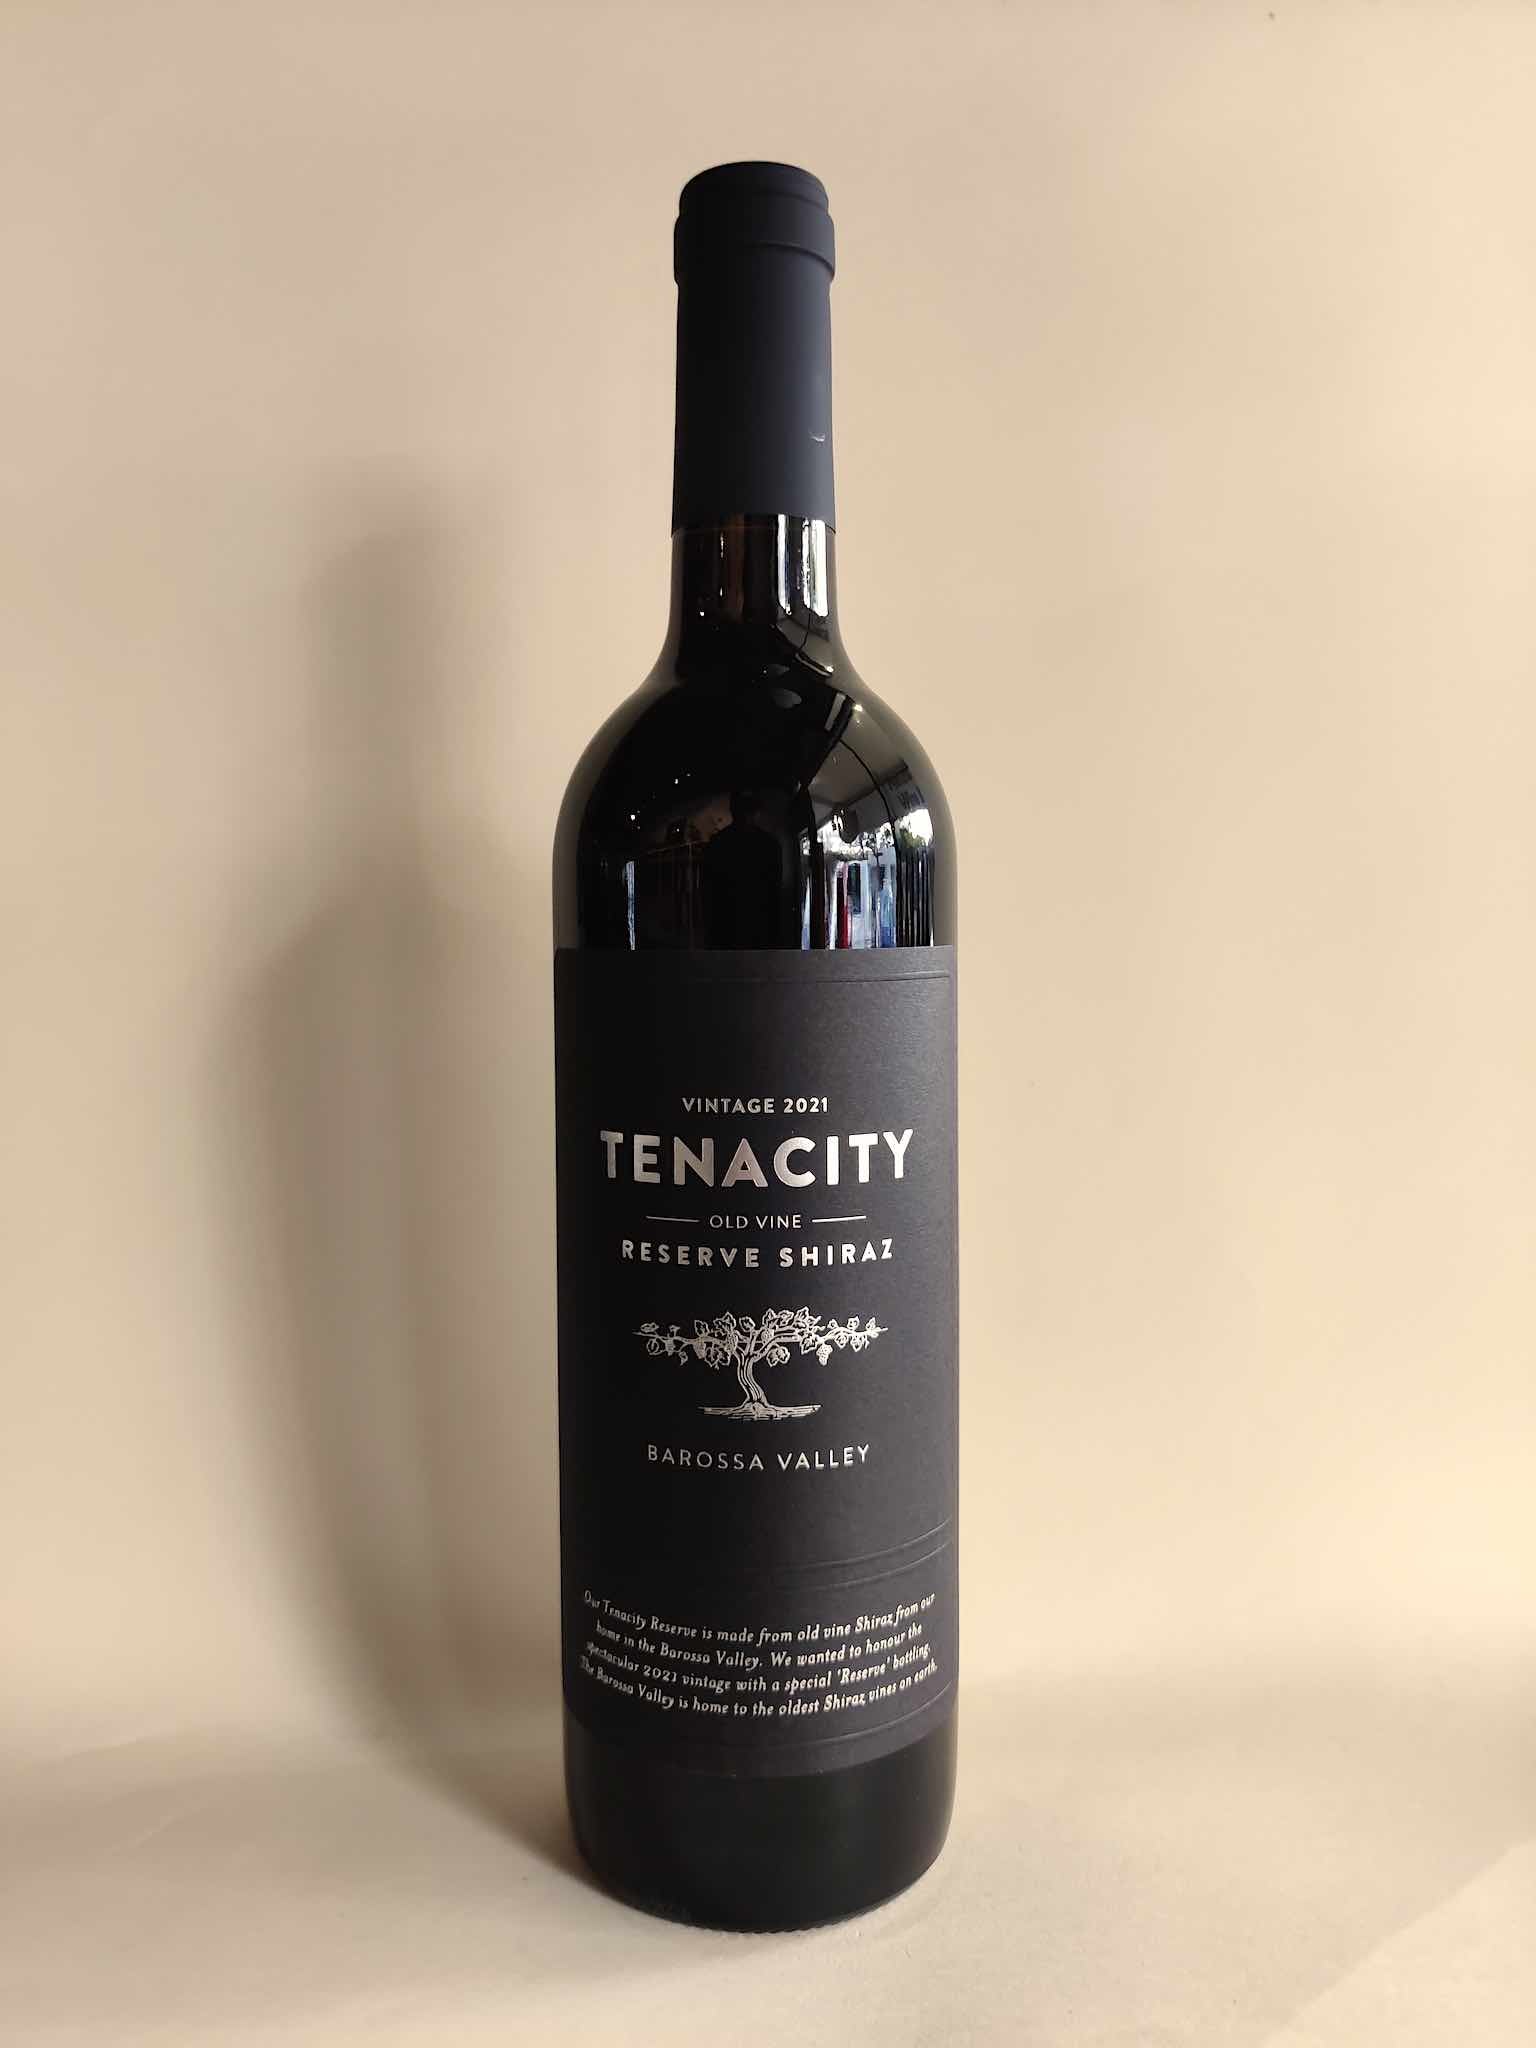 A bottle of Two Hands Tenacity Reserve Shiraz from the Barossa Valley.